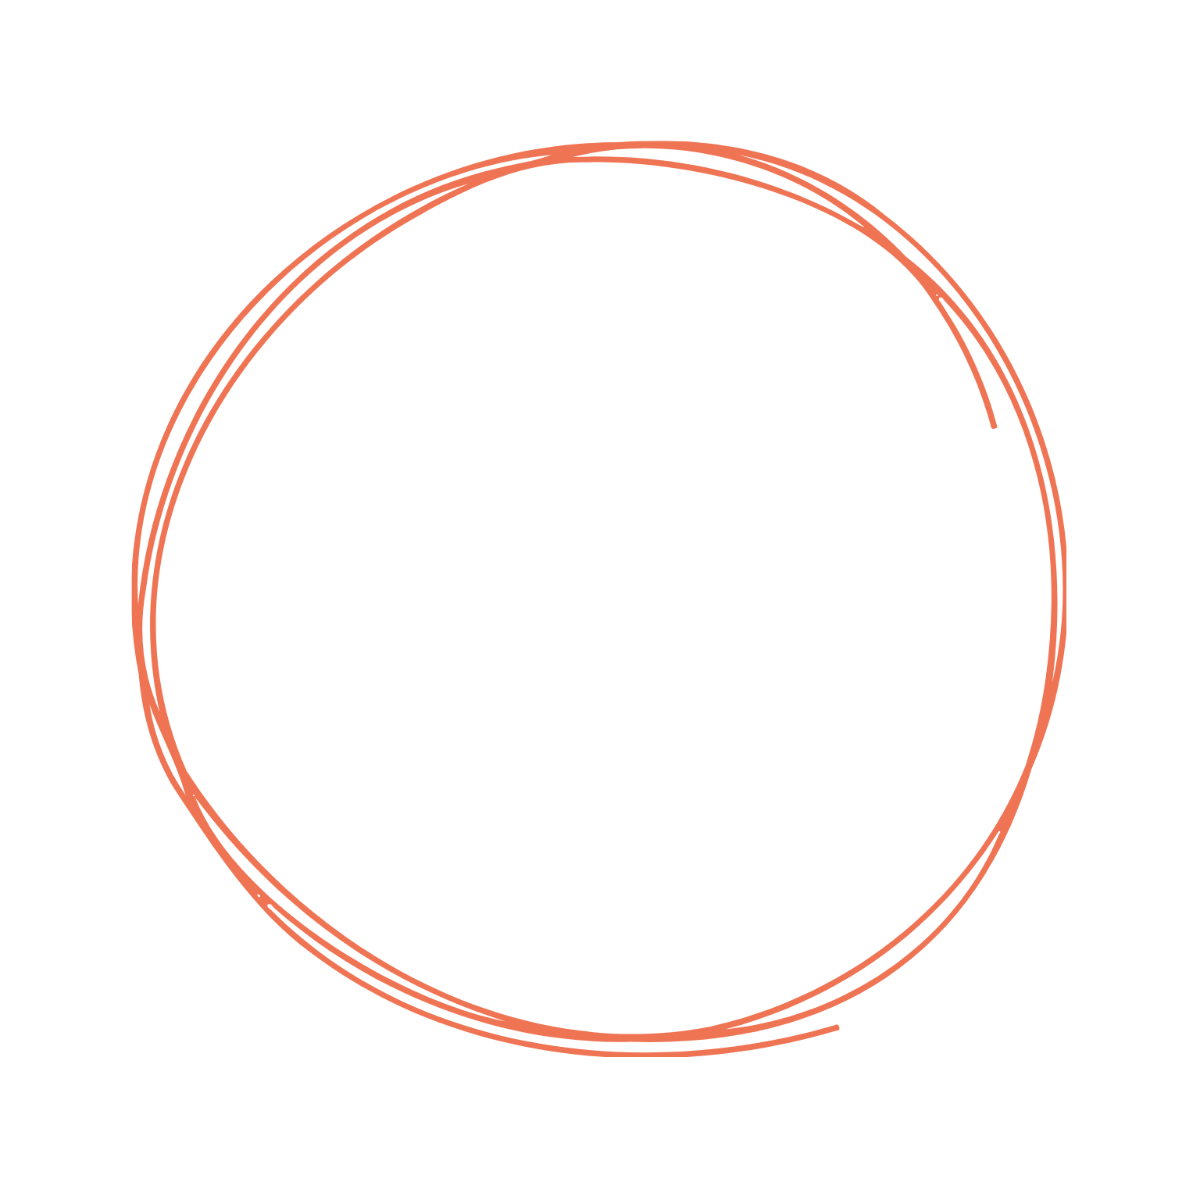 Circle Outline clipart Template